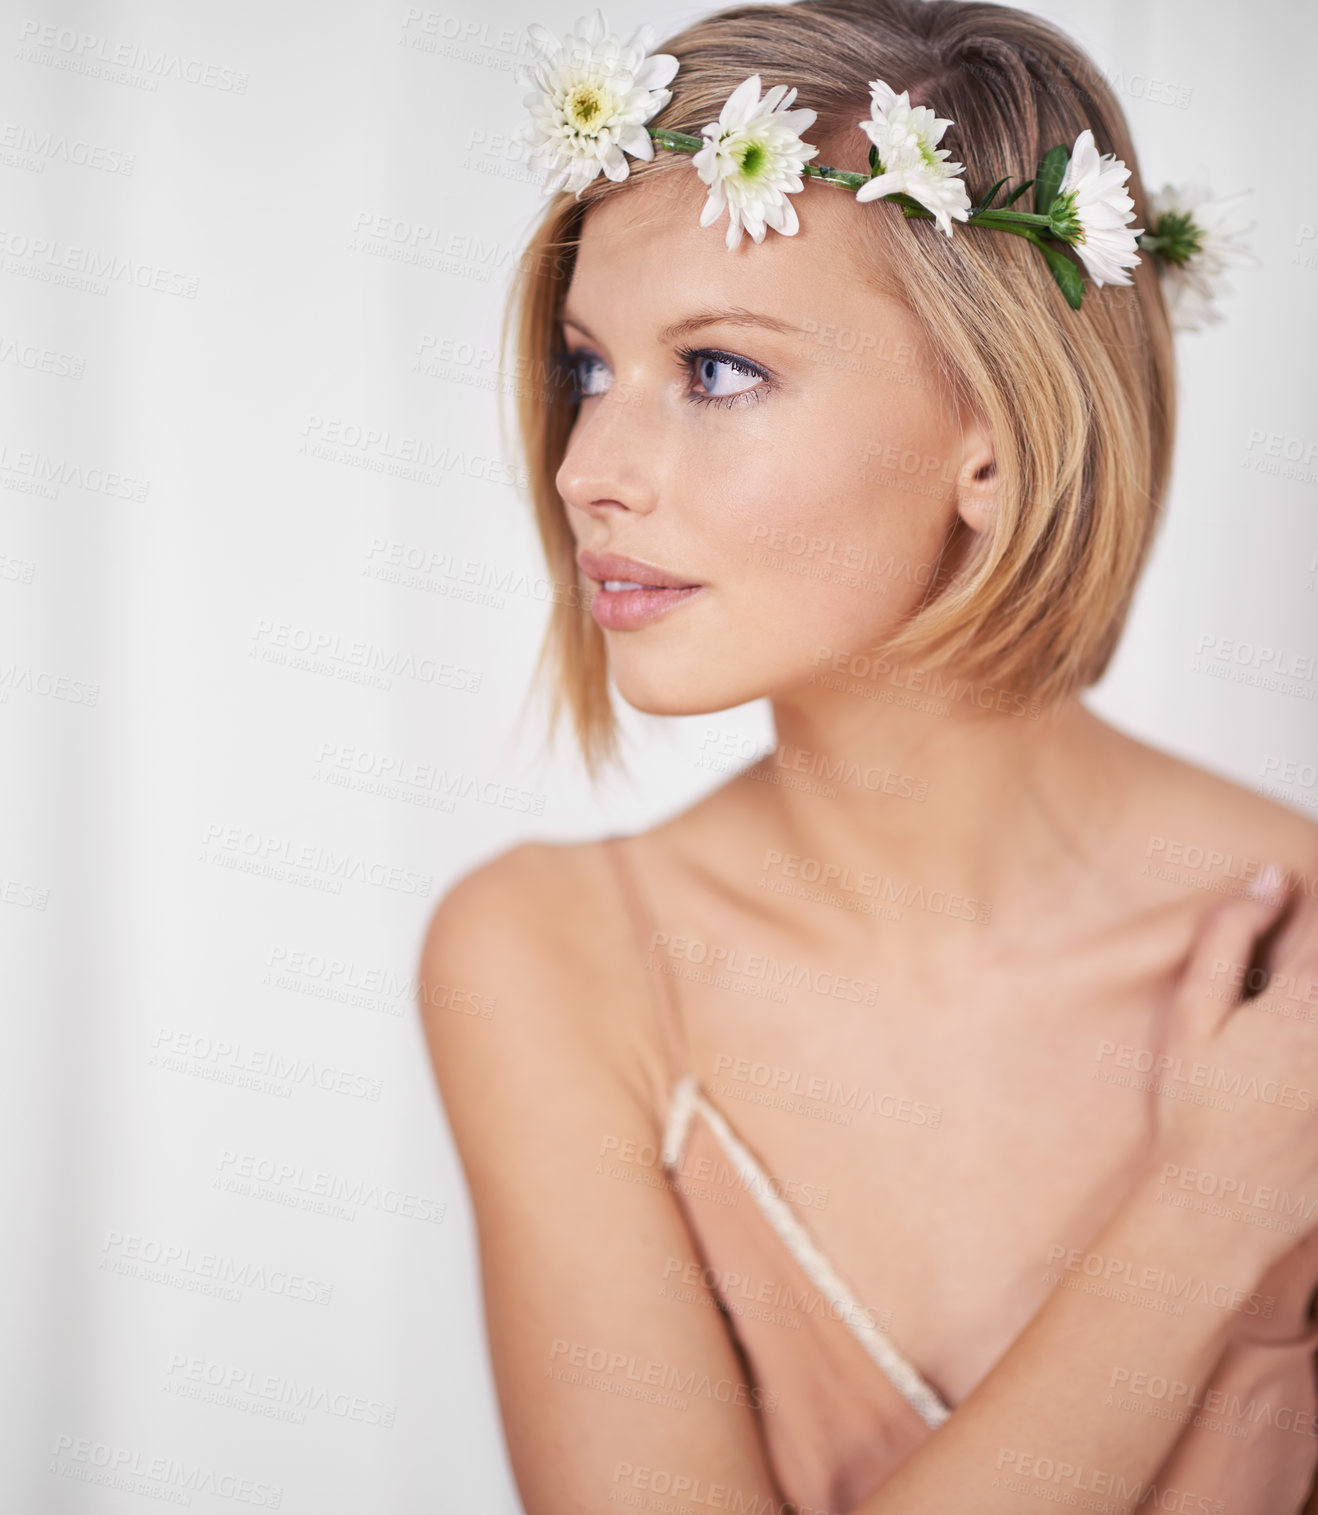 Buy stock photo A beautiful young woman wearing a flower crown and looking thoughtful